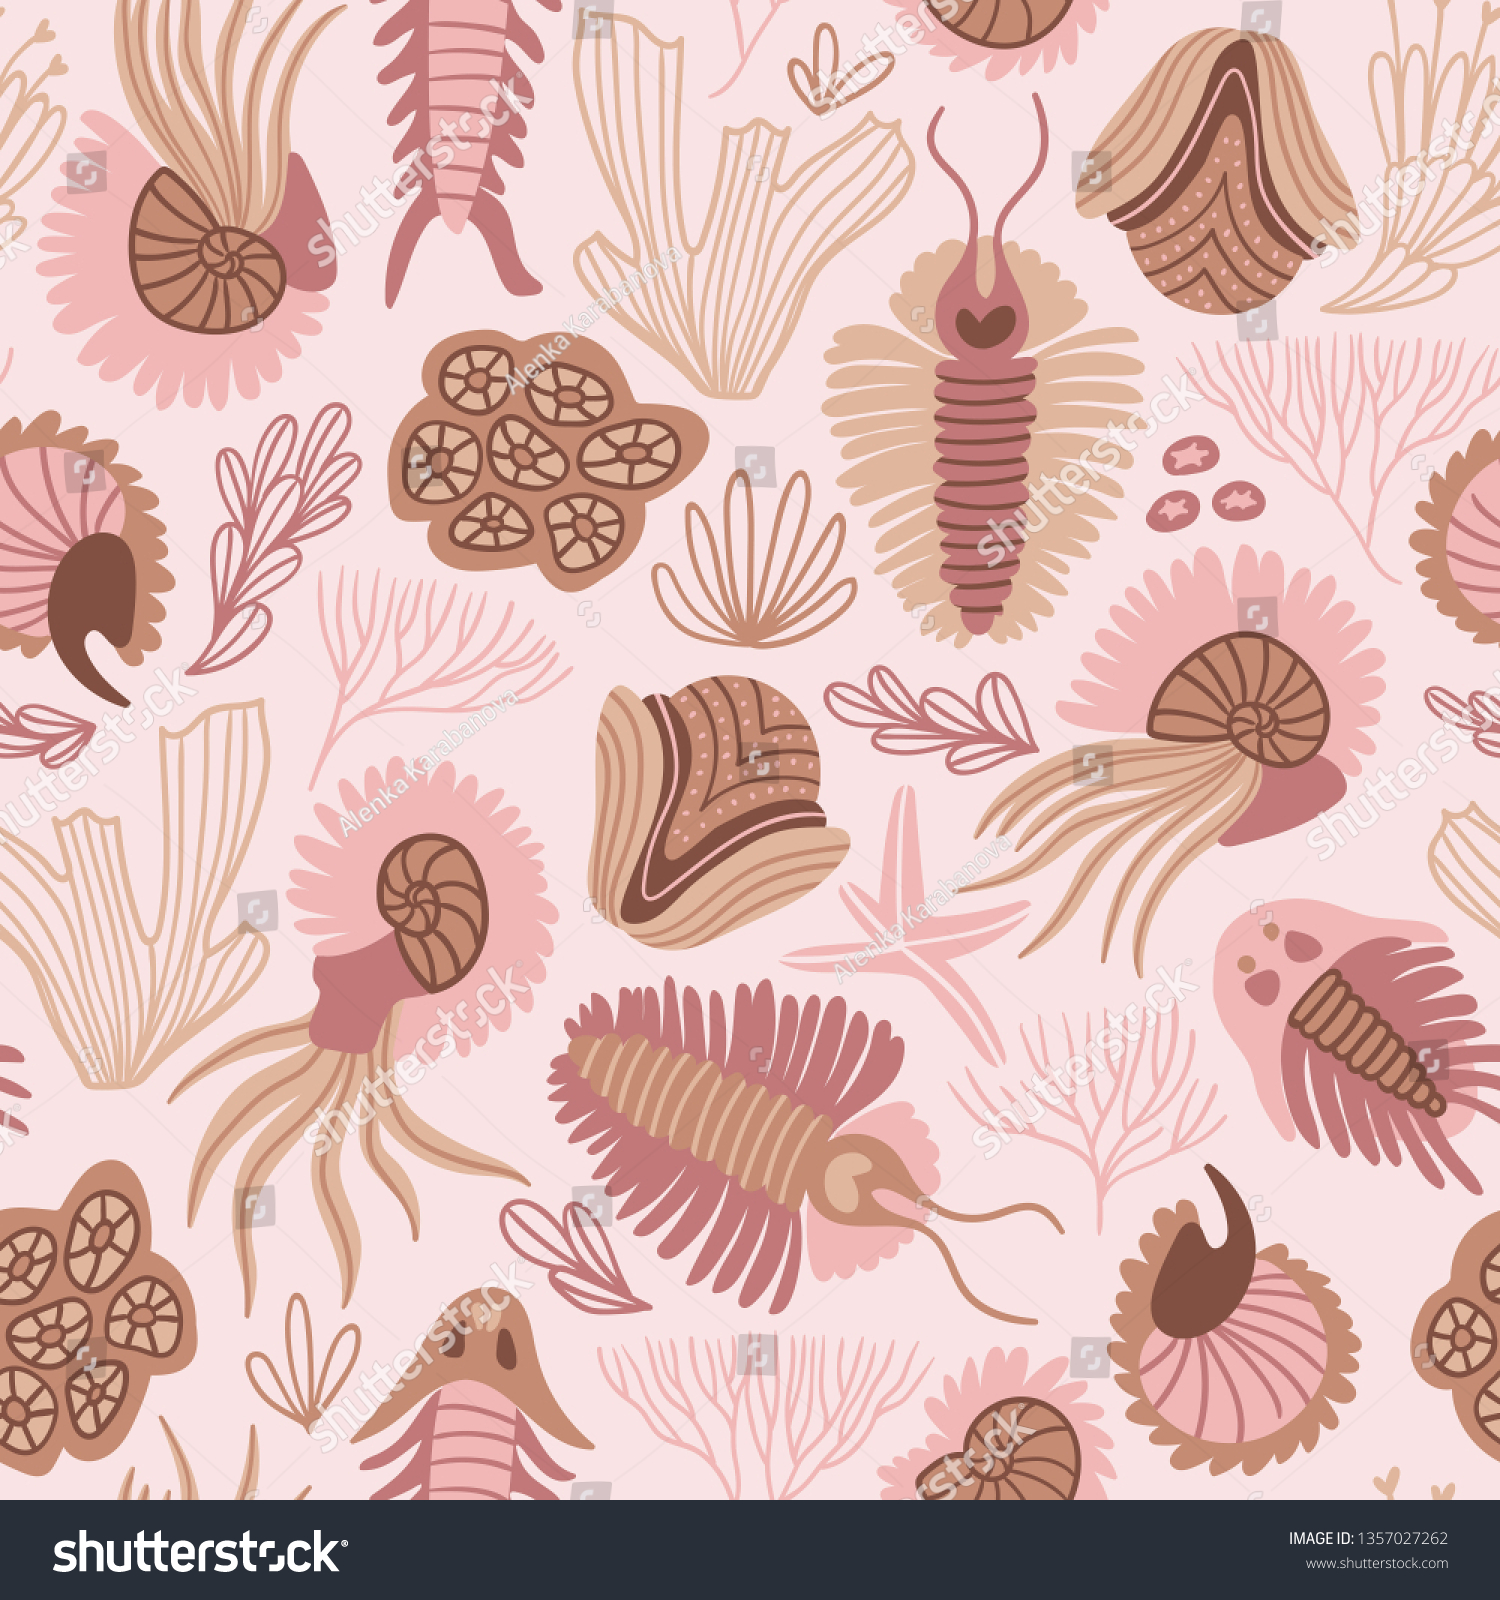 SVG of Seamless patterns design for fabric or wrap paper. Chambered Nautilus (Nautilus Pompilius) and other shells isolated on pink background. Pearly shell ocean mollusks.  Vector illustration. svg